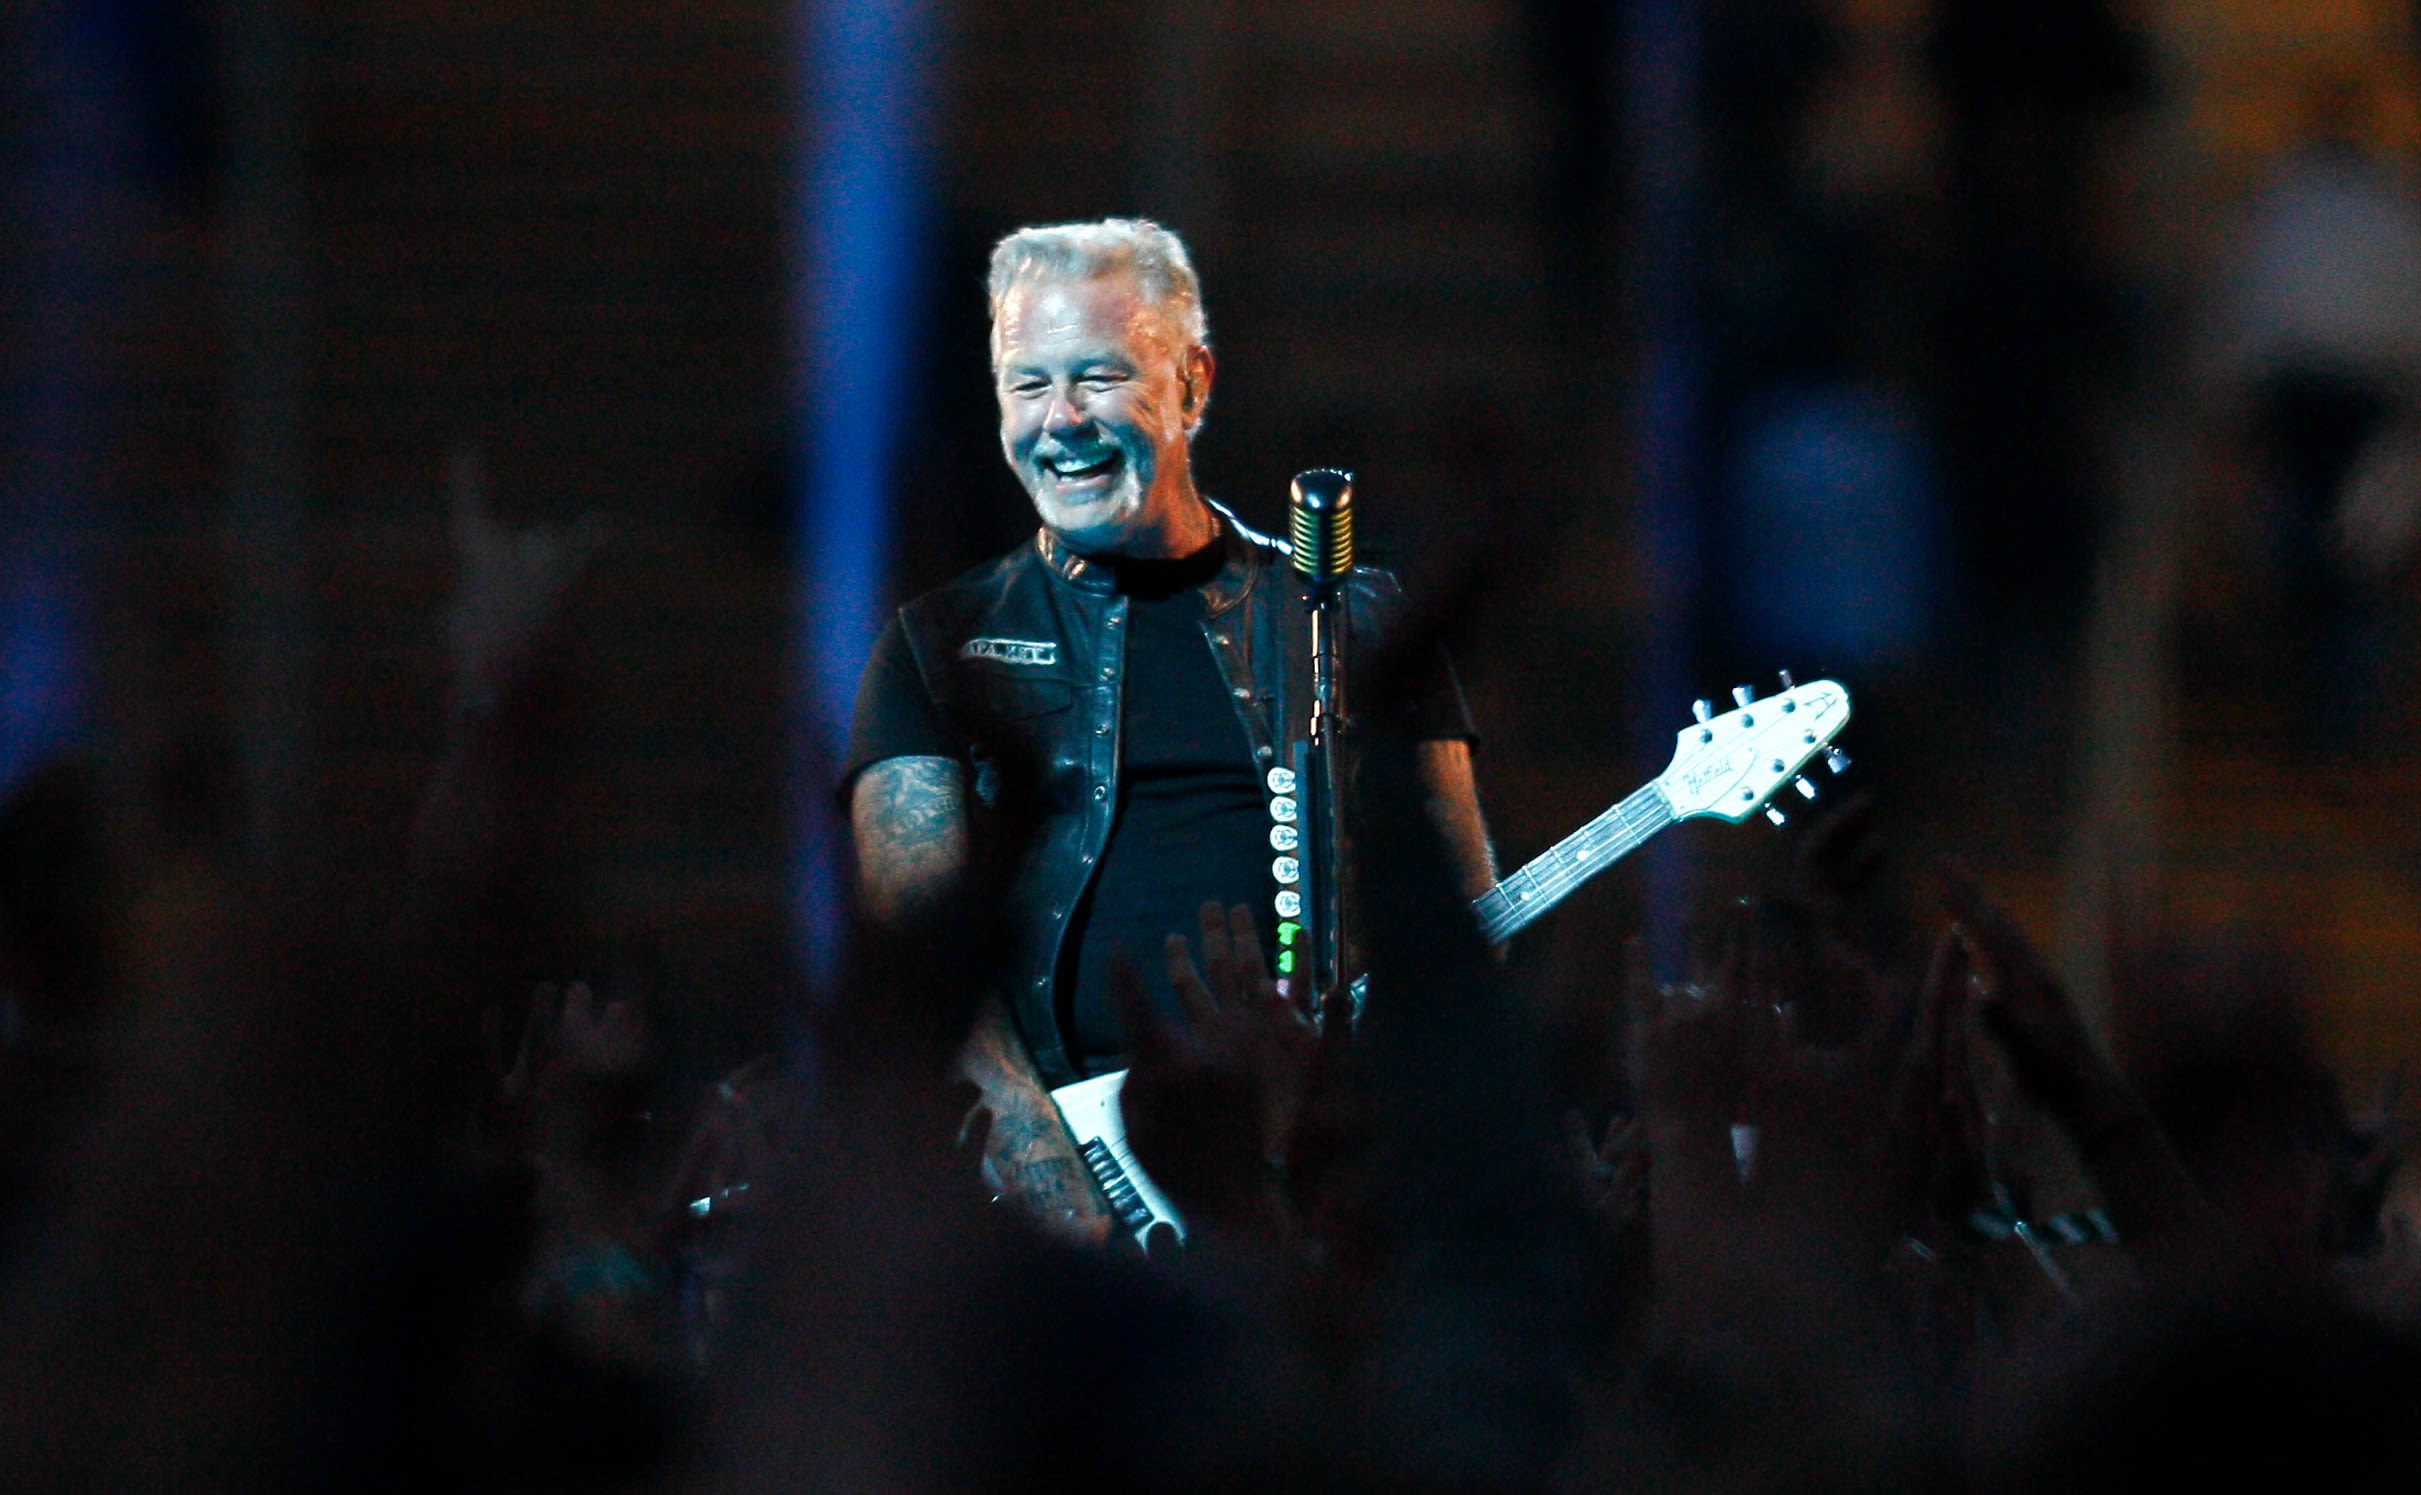 James Hetfield talks about overcoming anxiety and having faith in his creativity